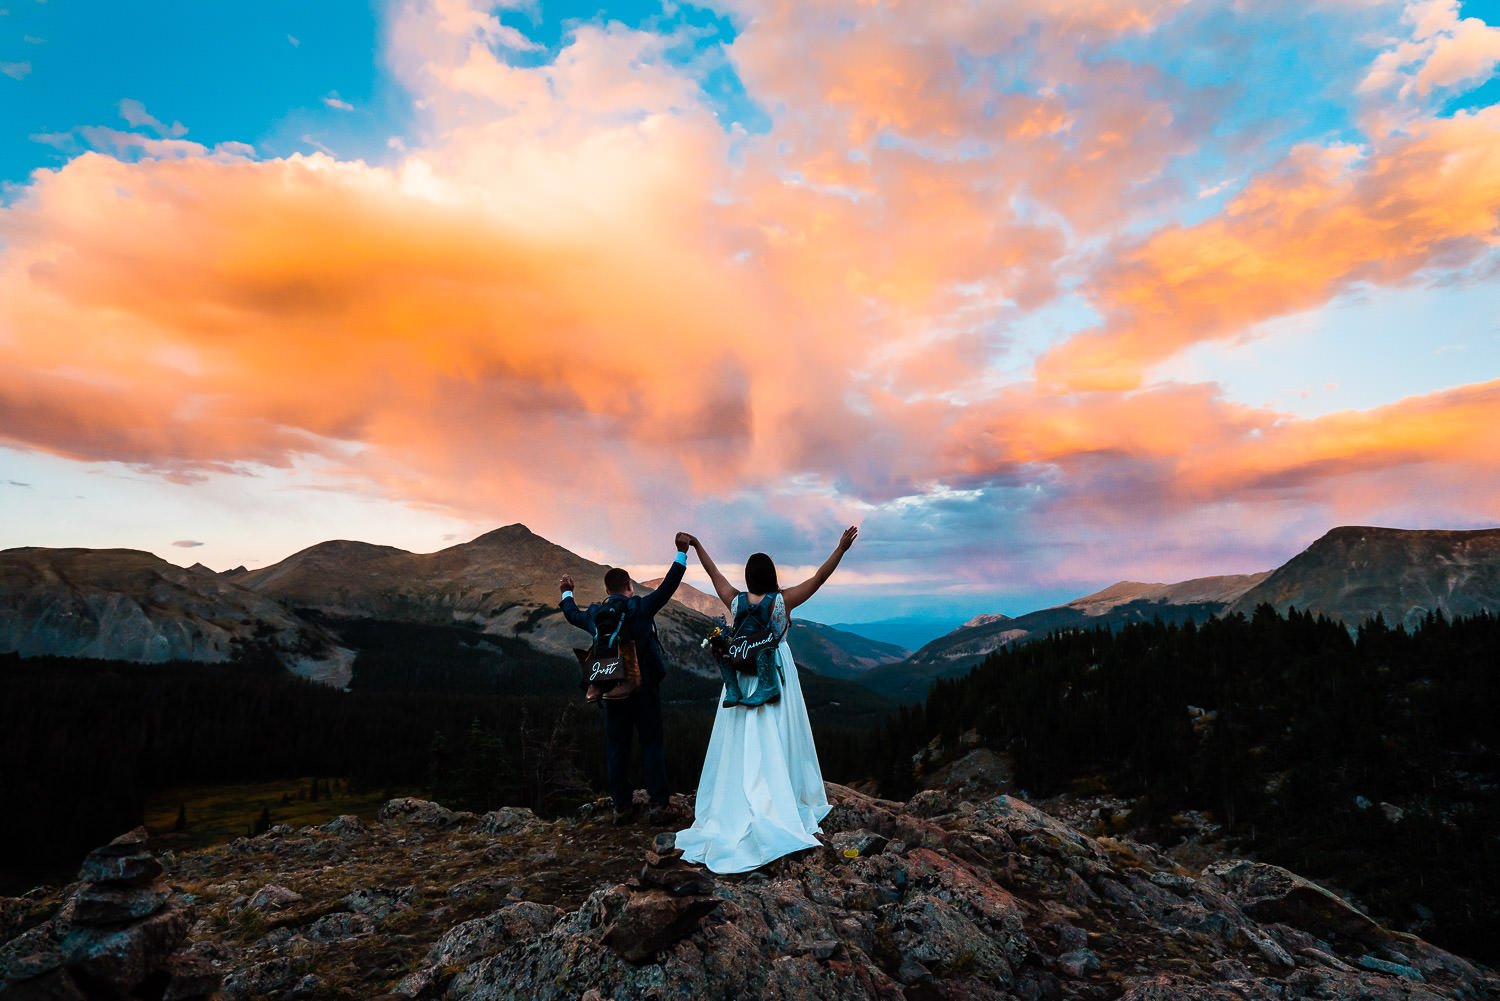 A mesmerizing elopement photoshoot captures a bride and groom standing on top of a mountain at sunset, bathed in the enchanting golden hues of dusk.